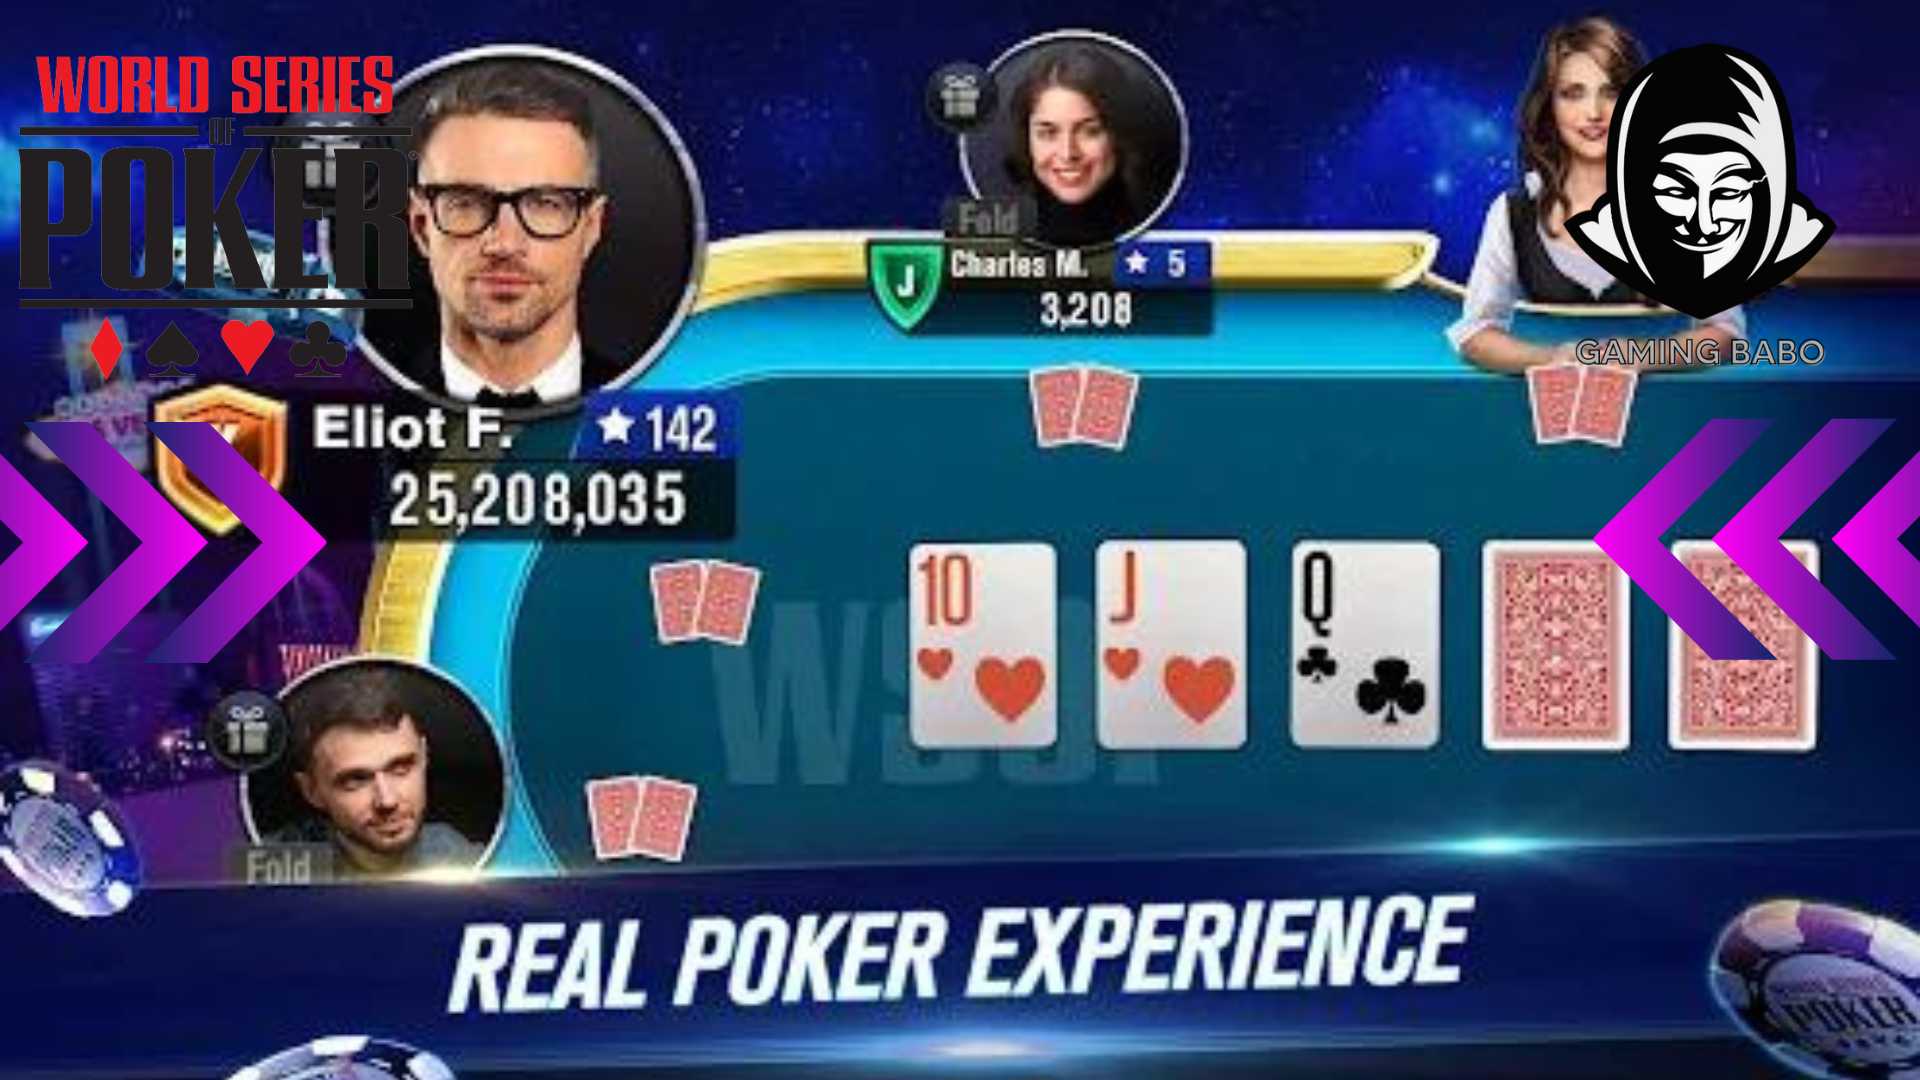 World Series of Poker tips and tricks